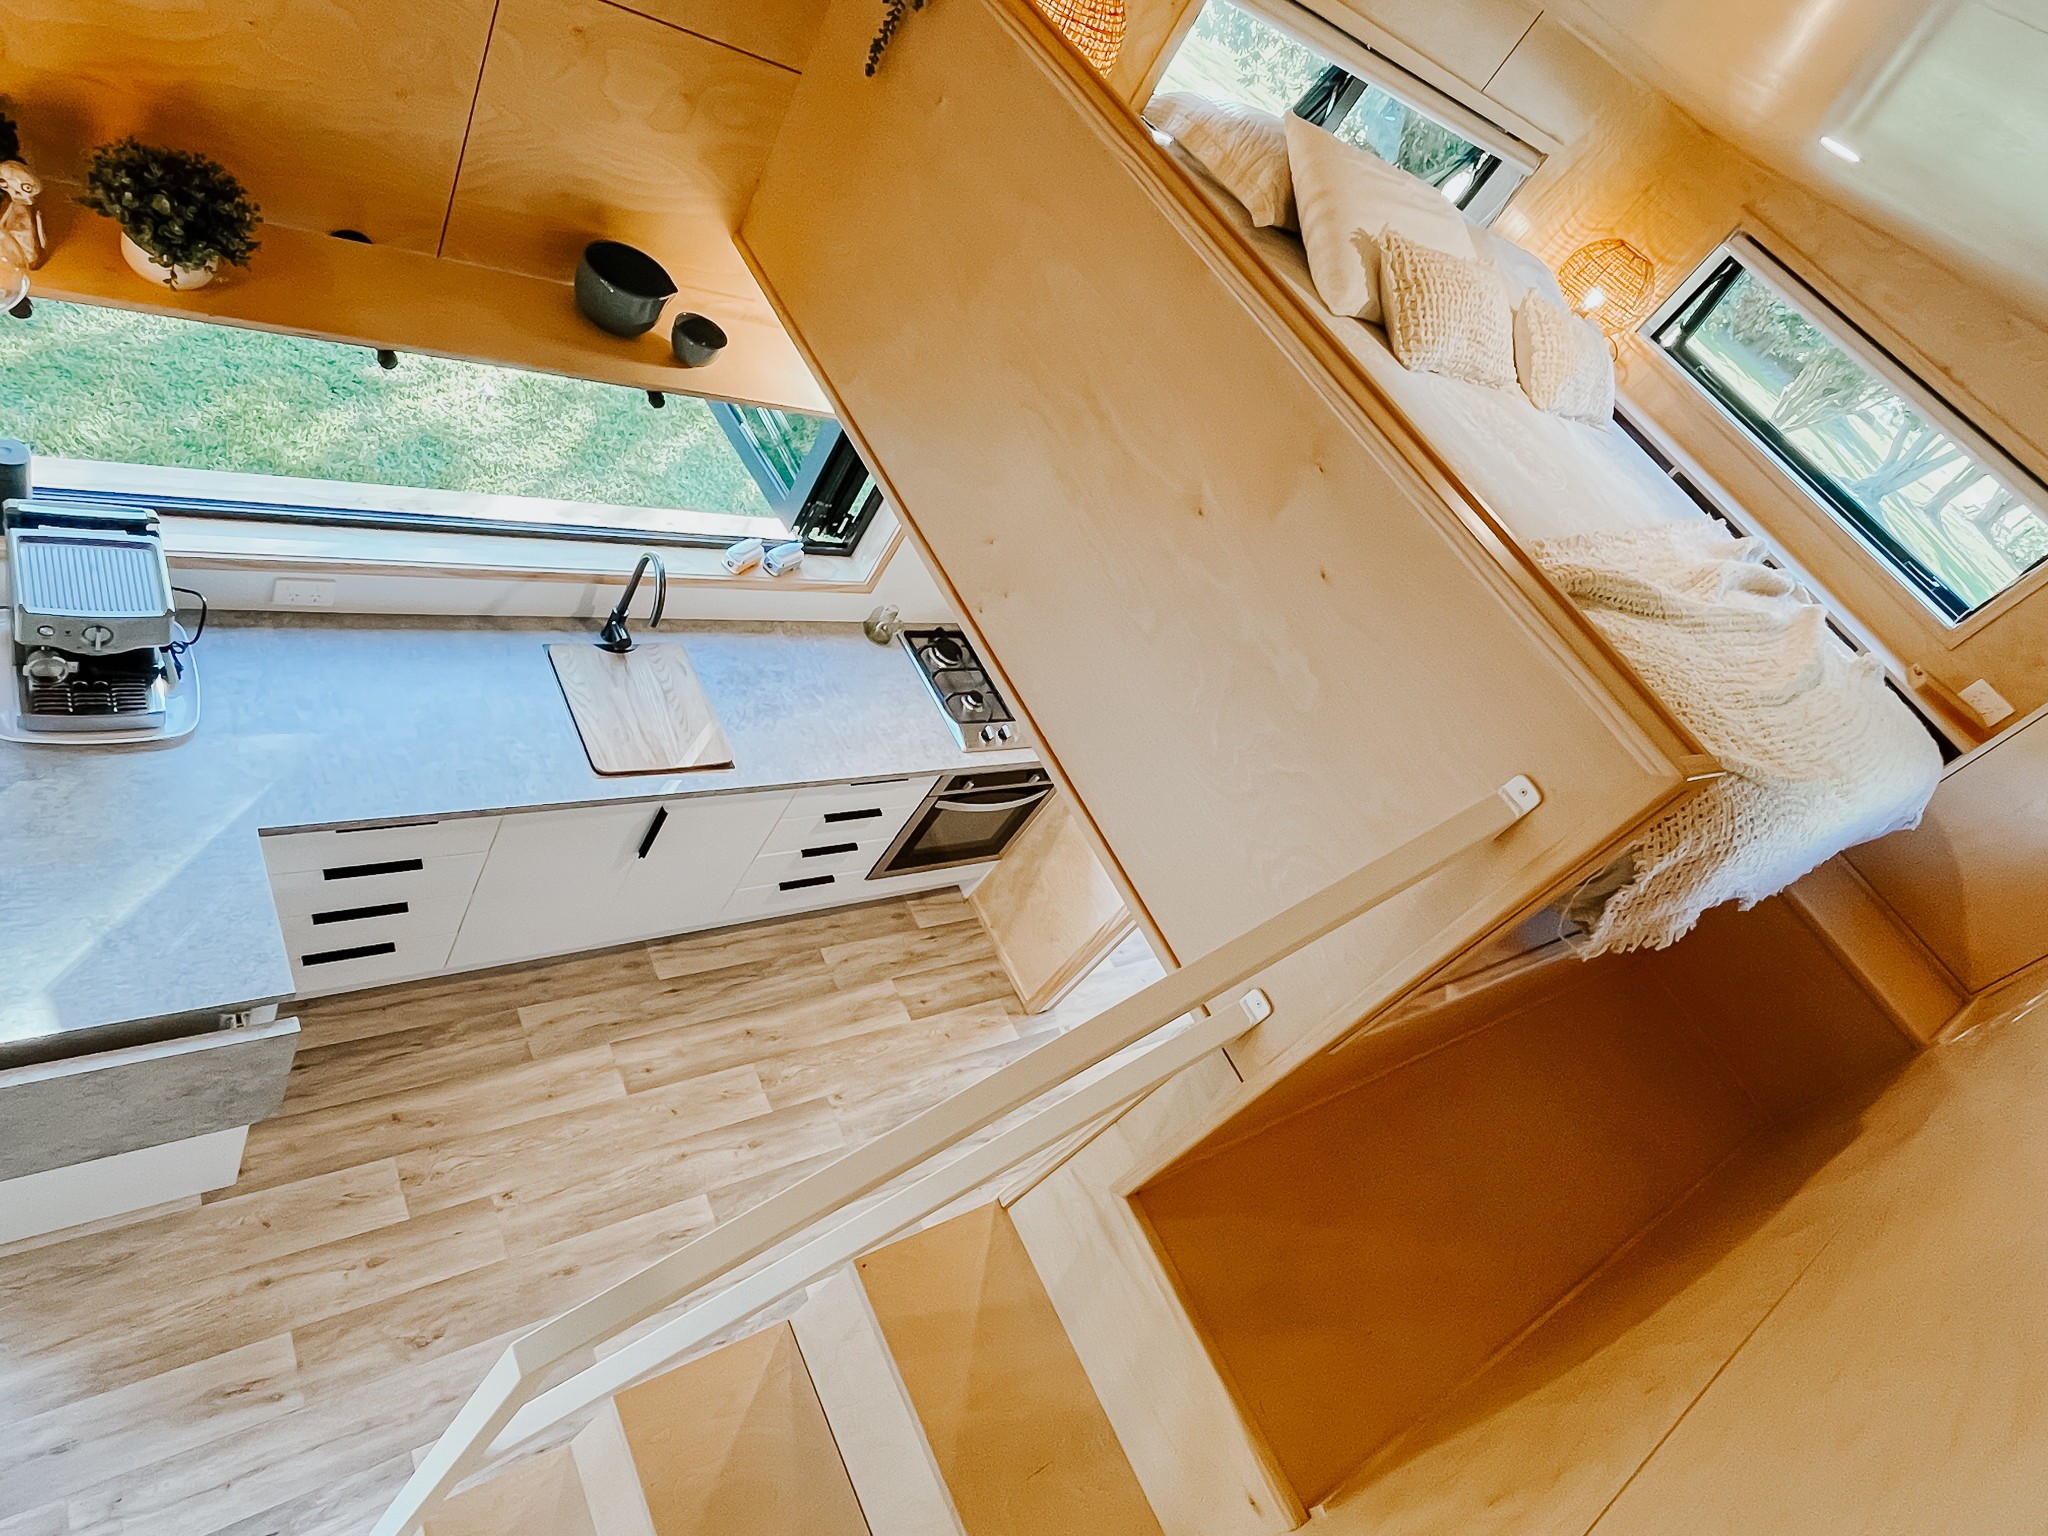 https://s1.cdn.autoevolution.com/images/news/gallery/joy-tiny-house-with-two-high-comfort-lofts-boasts-an-amazing-outdoor-indoor-flow_13.jpg